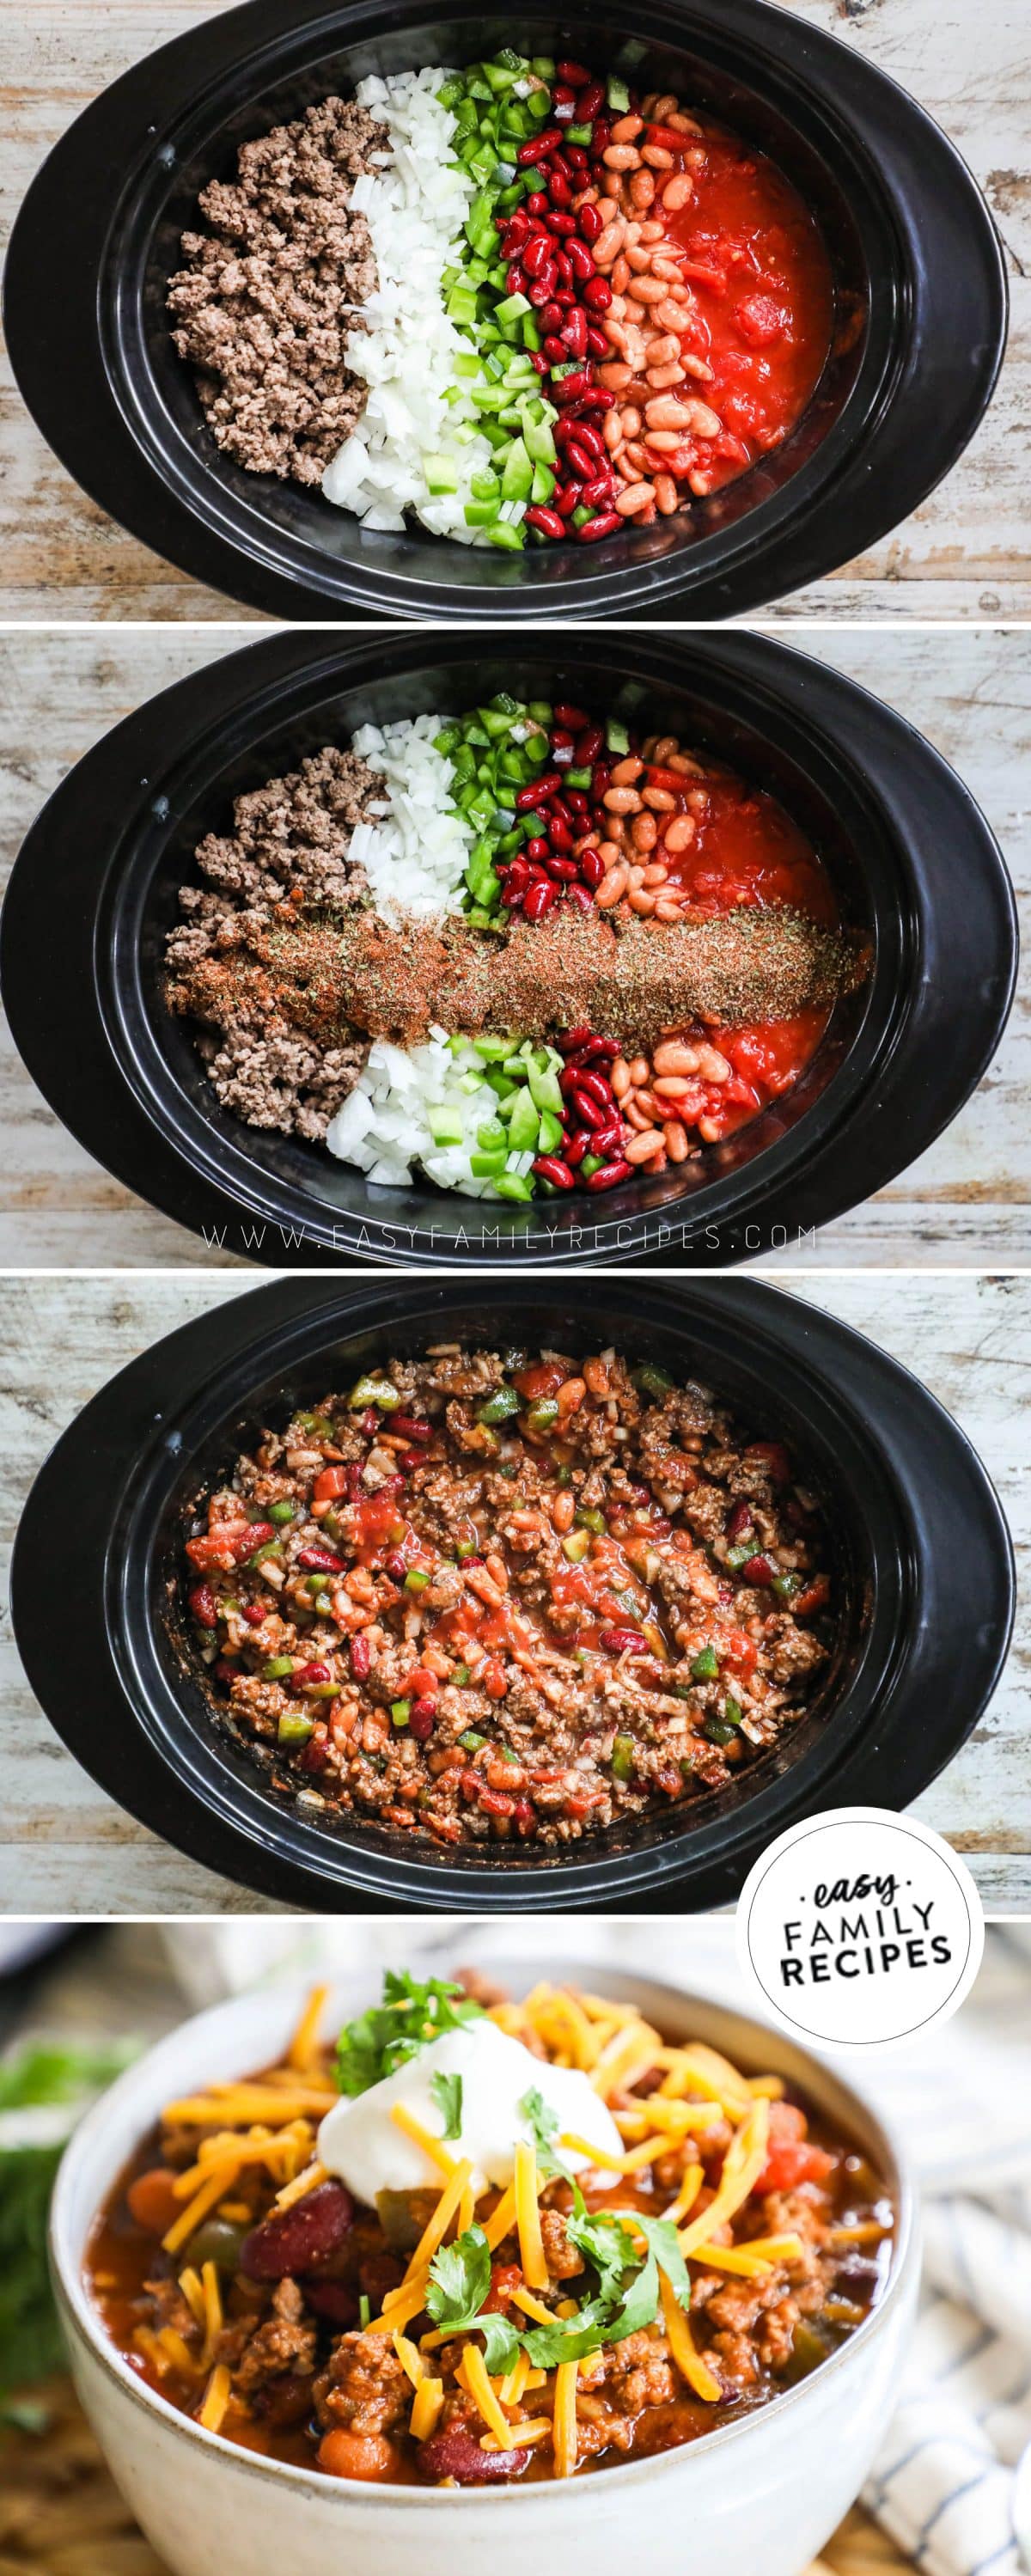 How to make Crock Pot beef chili 1)load all the ingredients into the slow cooker 2)add spices 3)cook 4)serve with toppings.